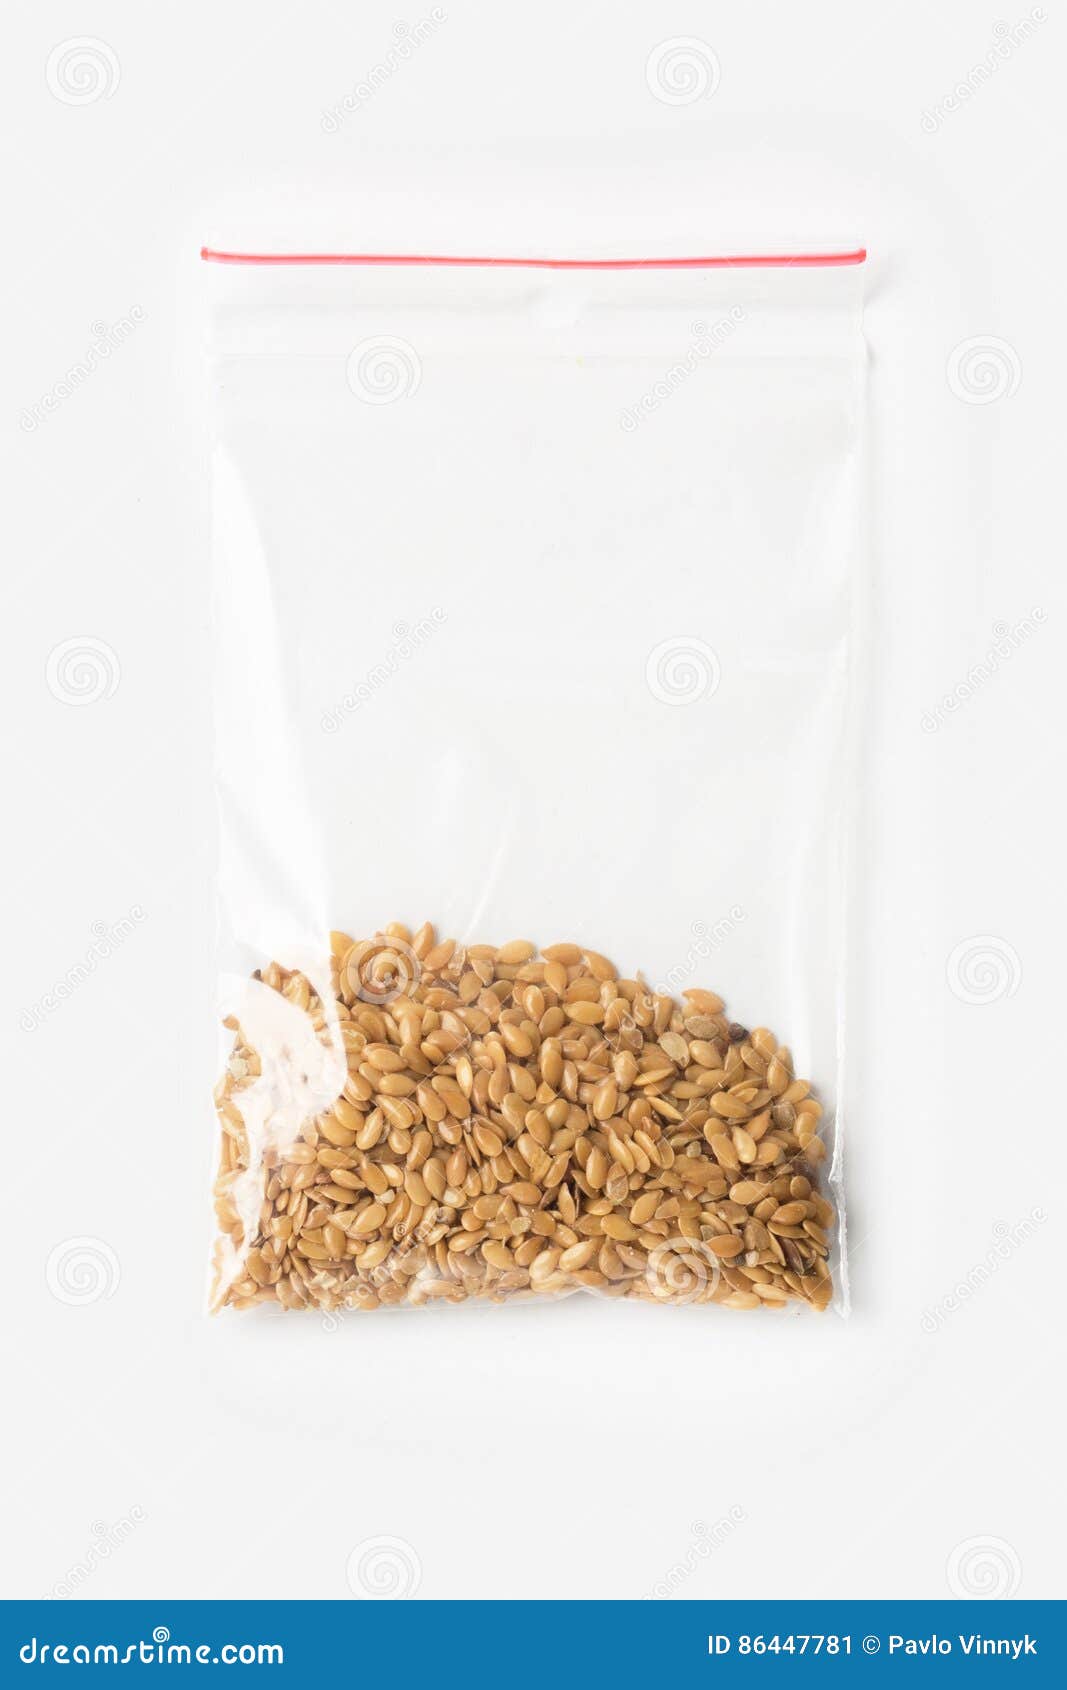 Download Plastic Transparent Zipper Bag With A Little Wholemeal Raw Flax Seeds Cerealisolated On White ...